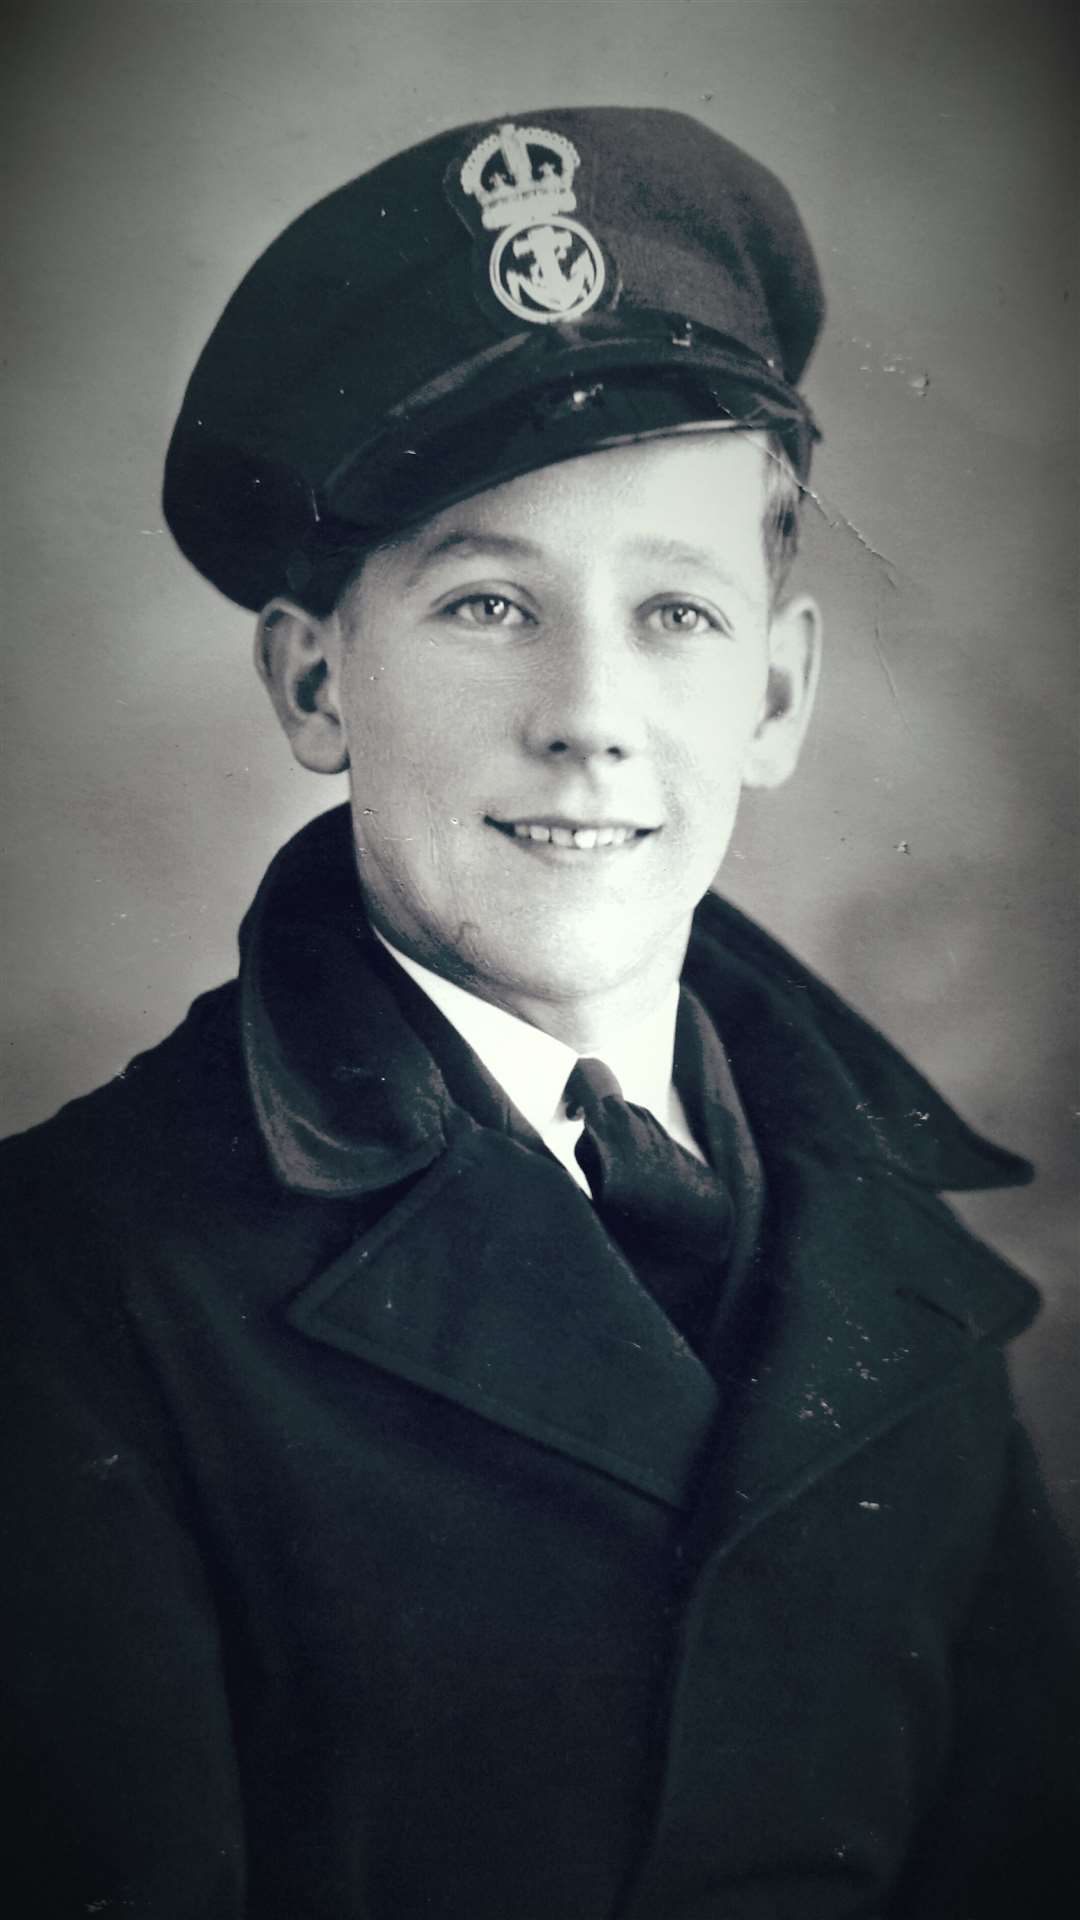 A young Cyril Stuart joined the Royal Navy at the start of the War